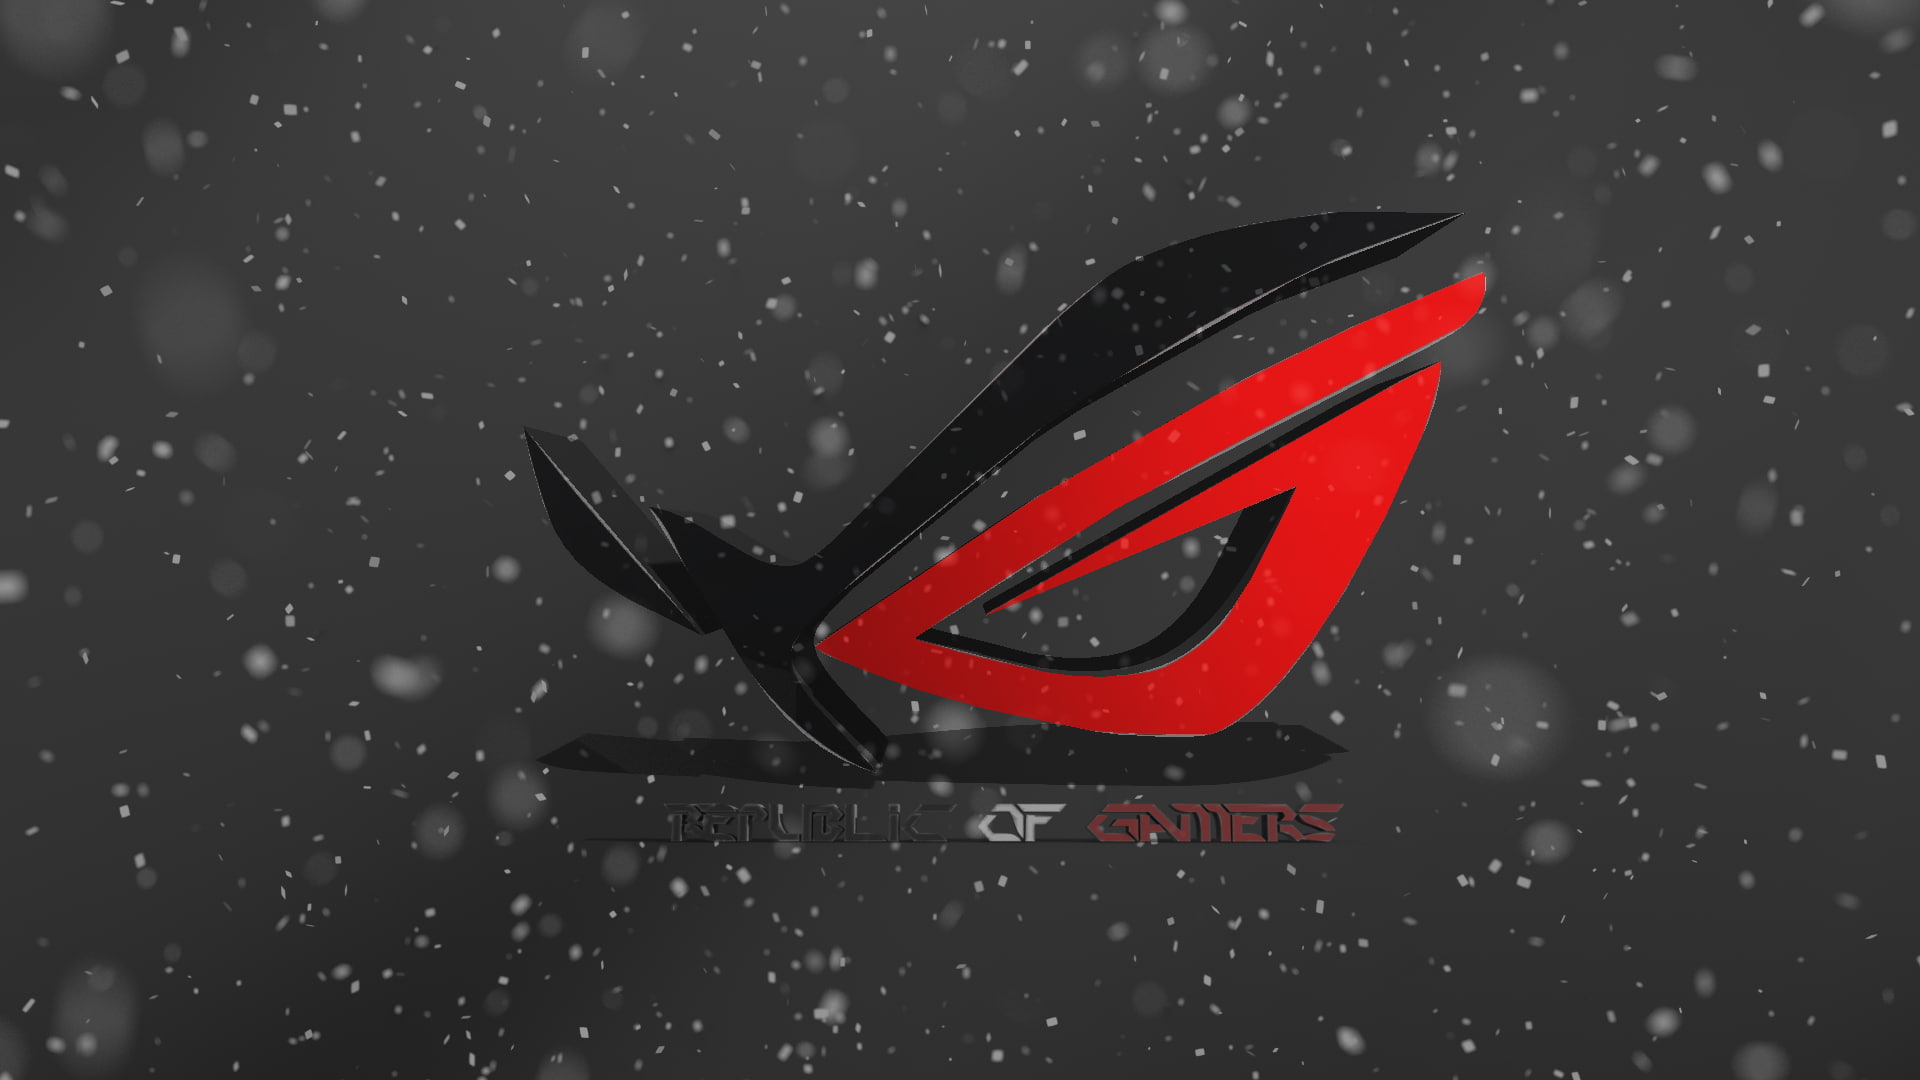 Republic of Gamers, ASUS, spike, 3D, logo, red, black, photo manipulation